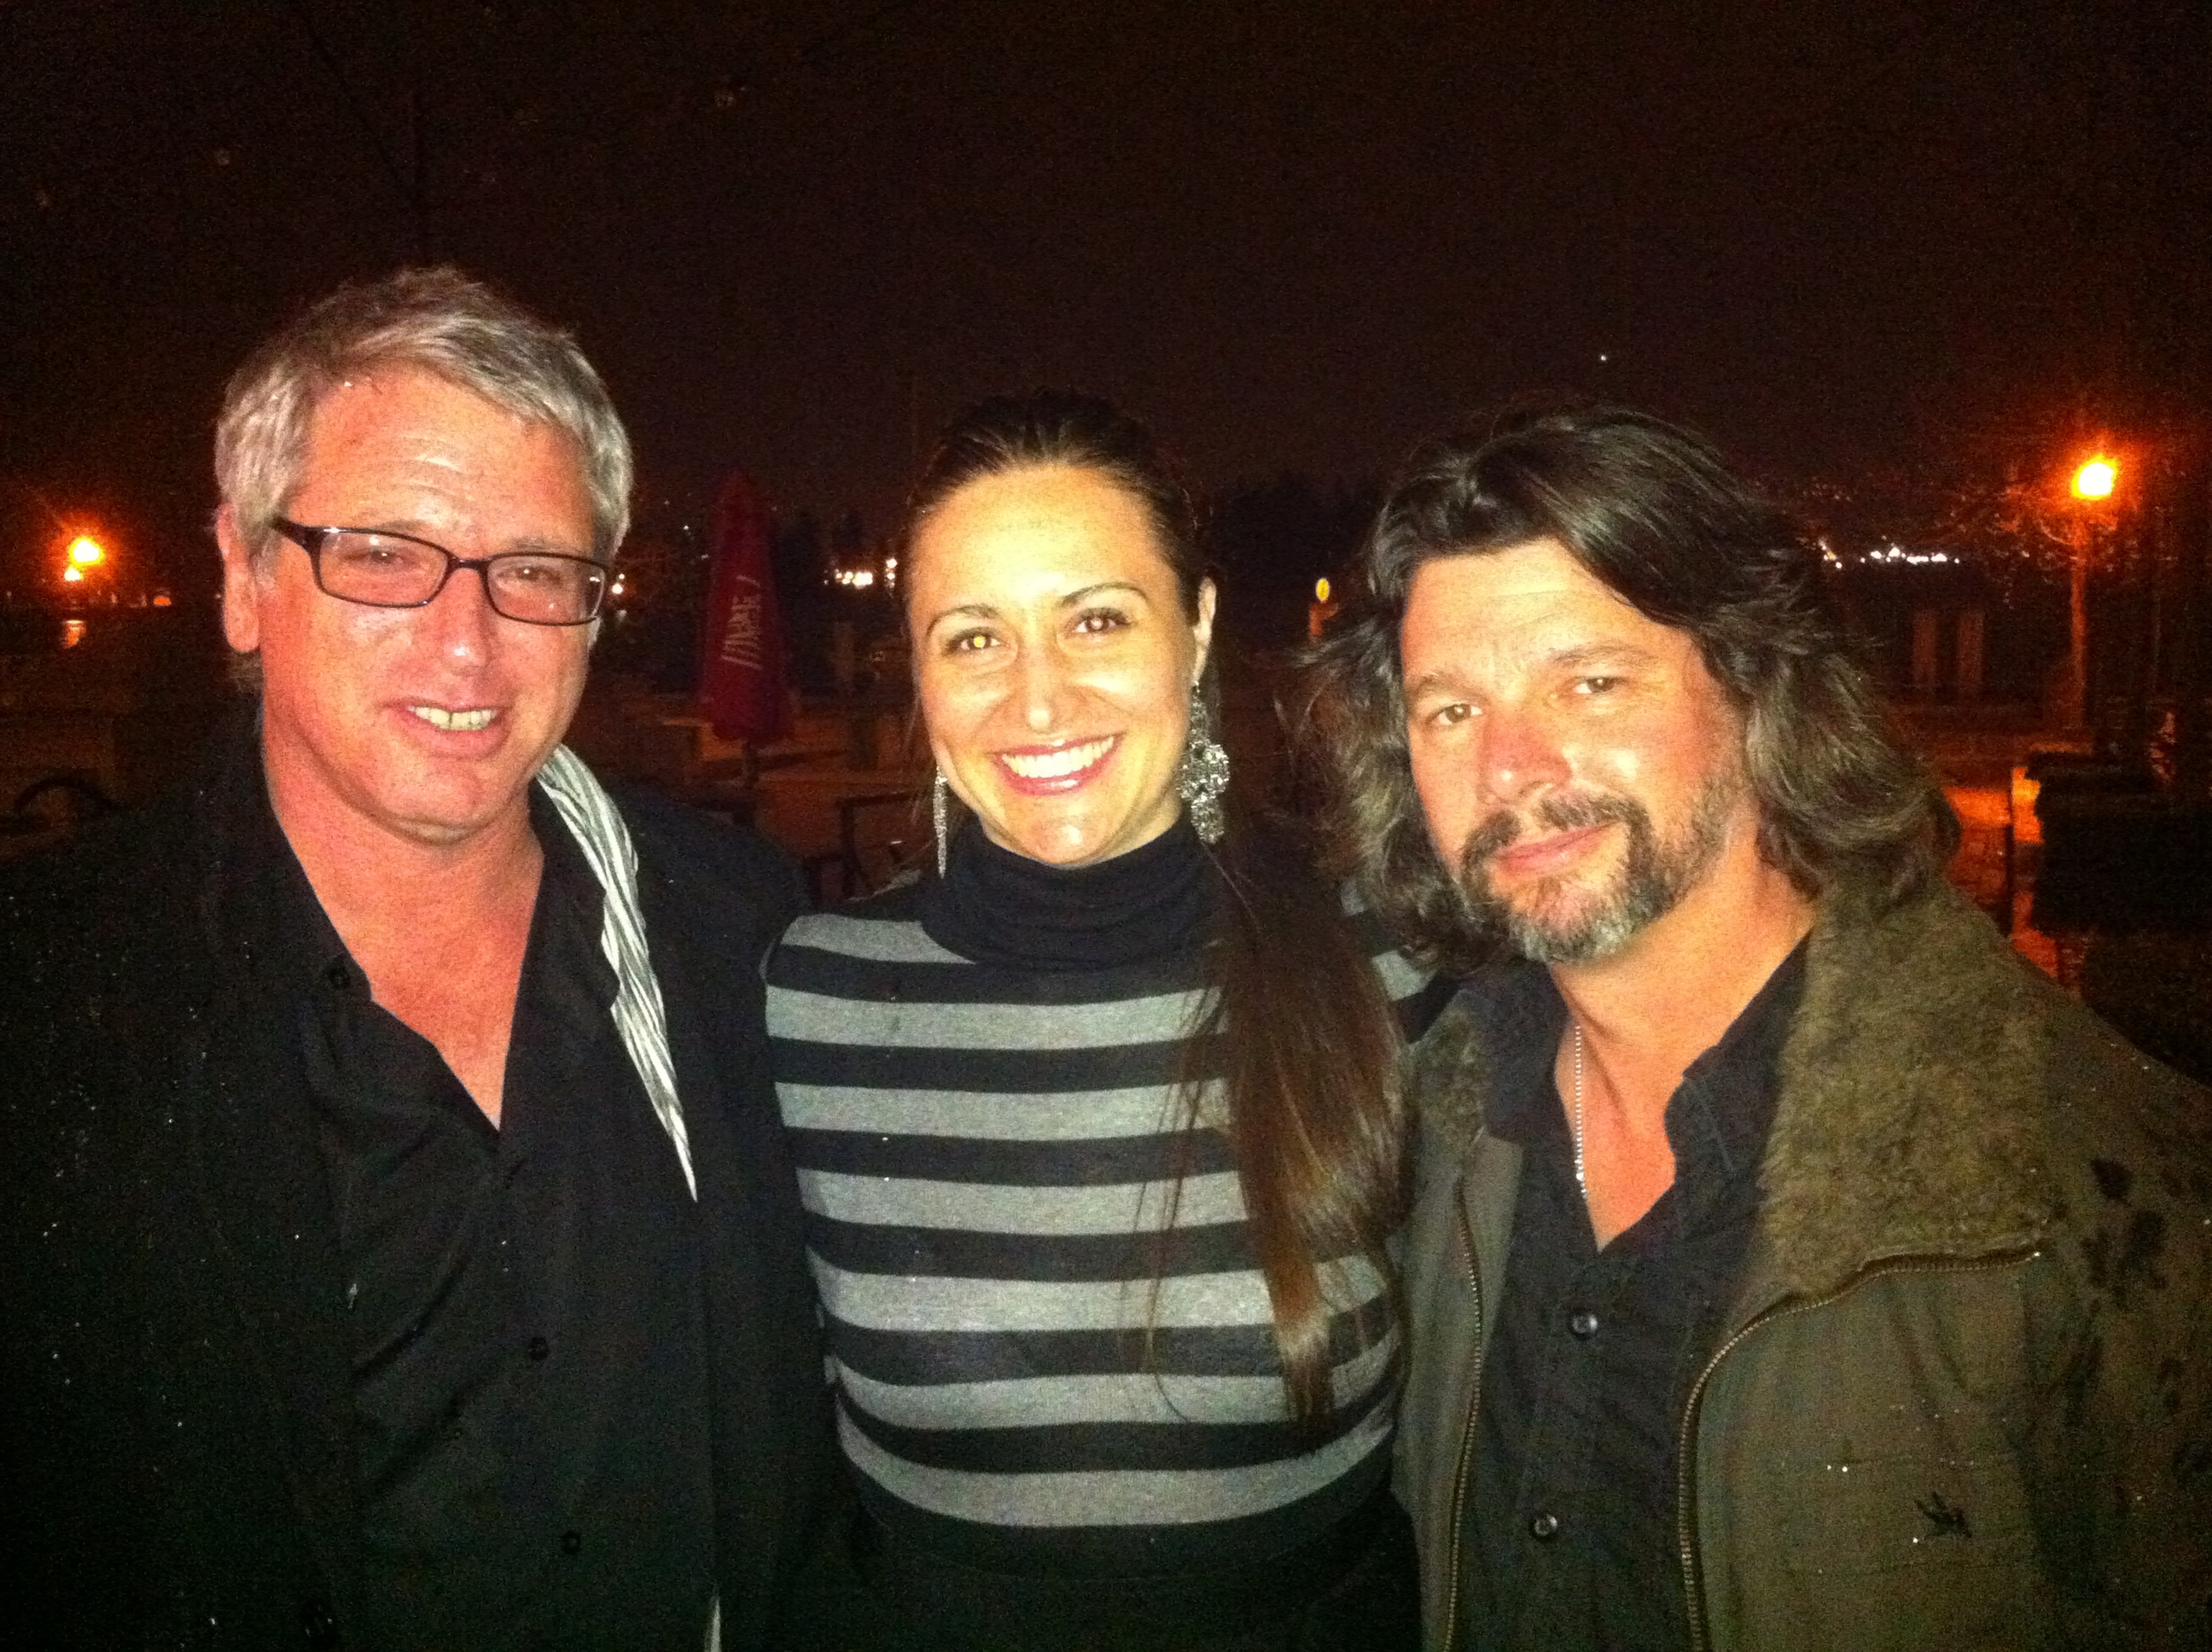 Me with Battlestar Galactica Producers and Director, Michael Rymer and Ronald D Moore at the 17th Precinct wrap party